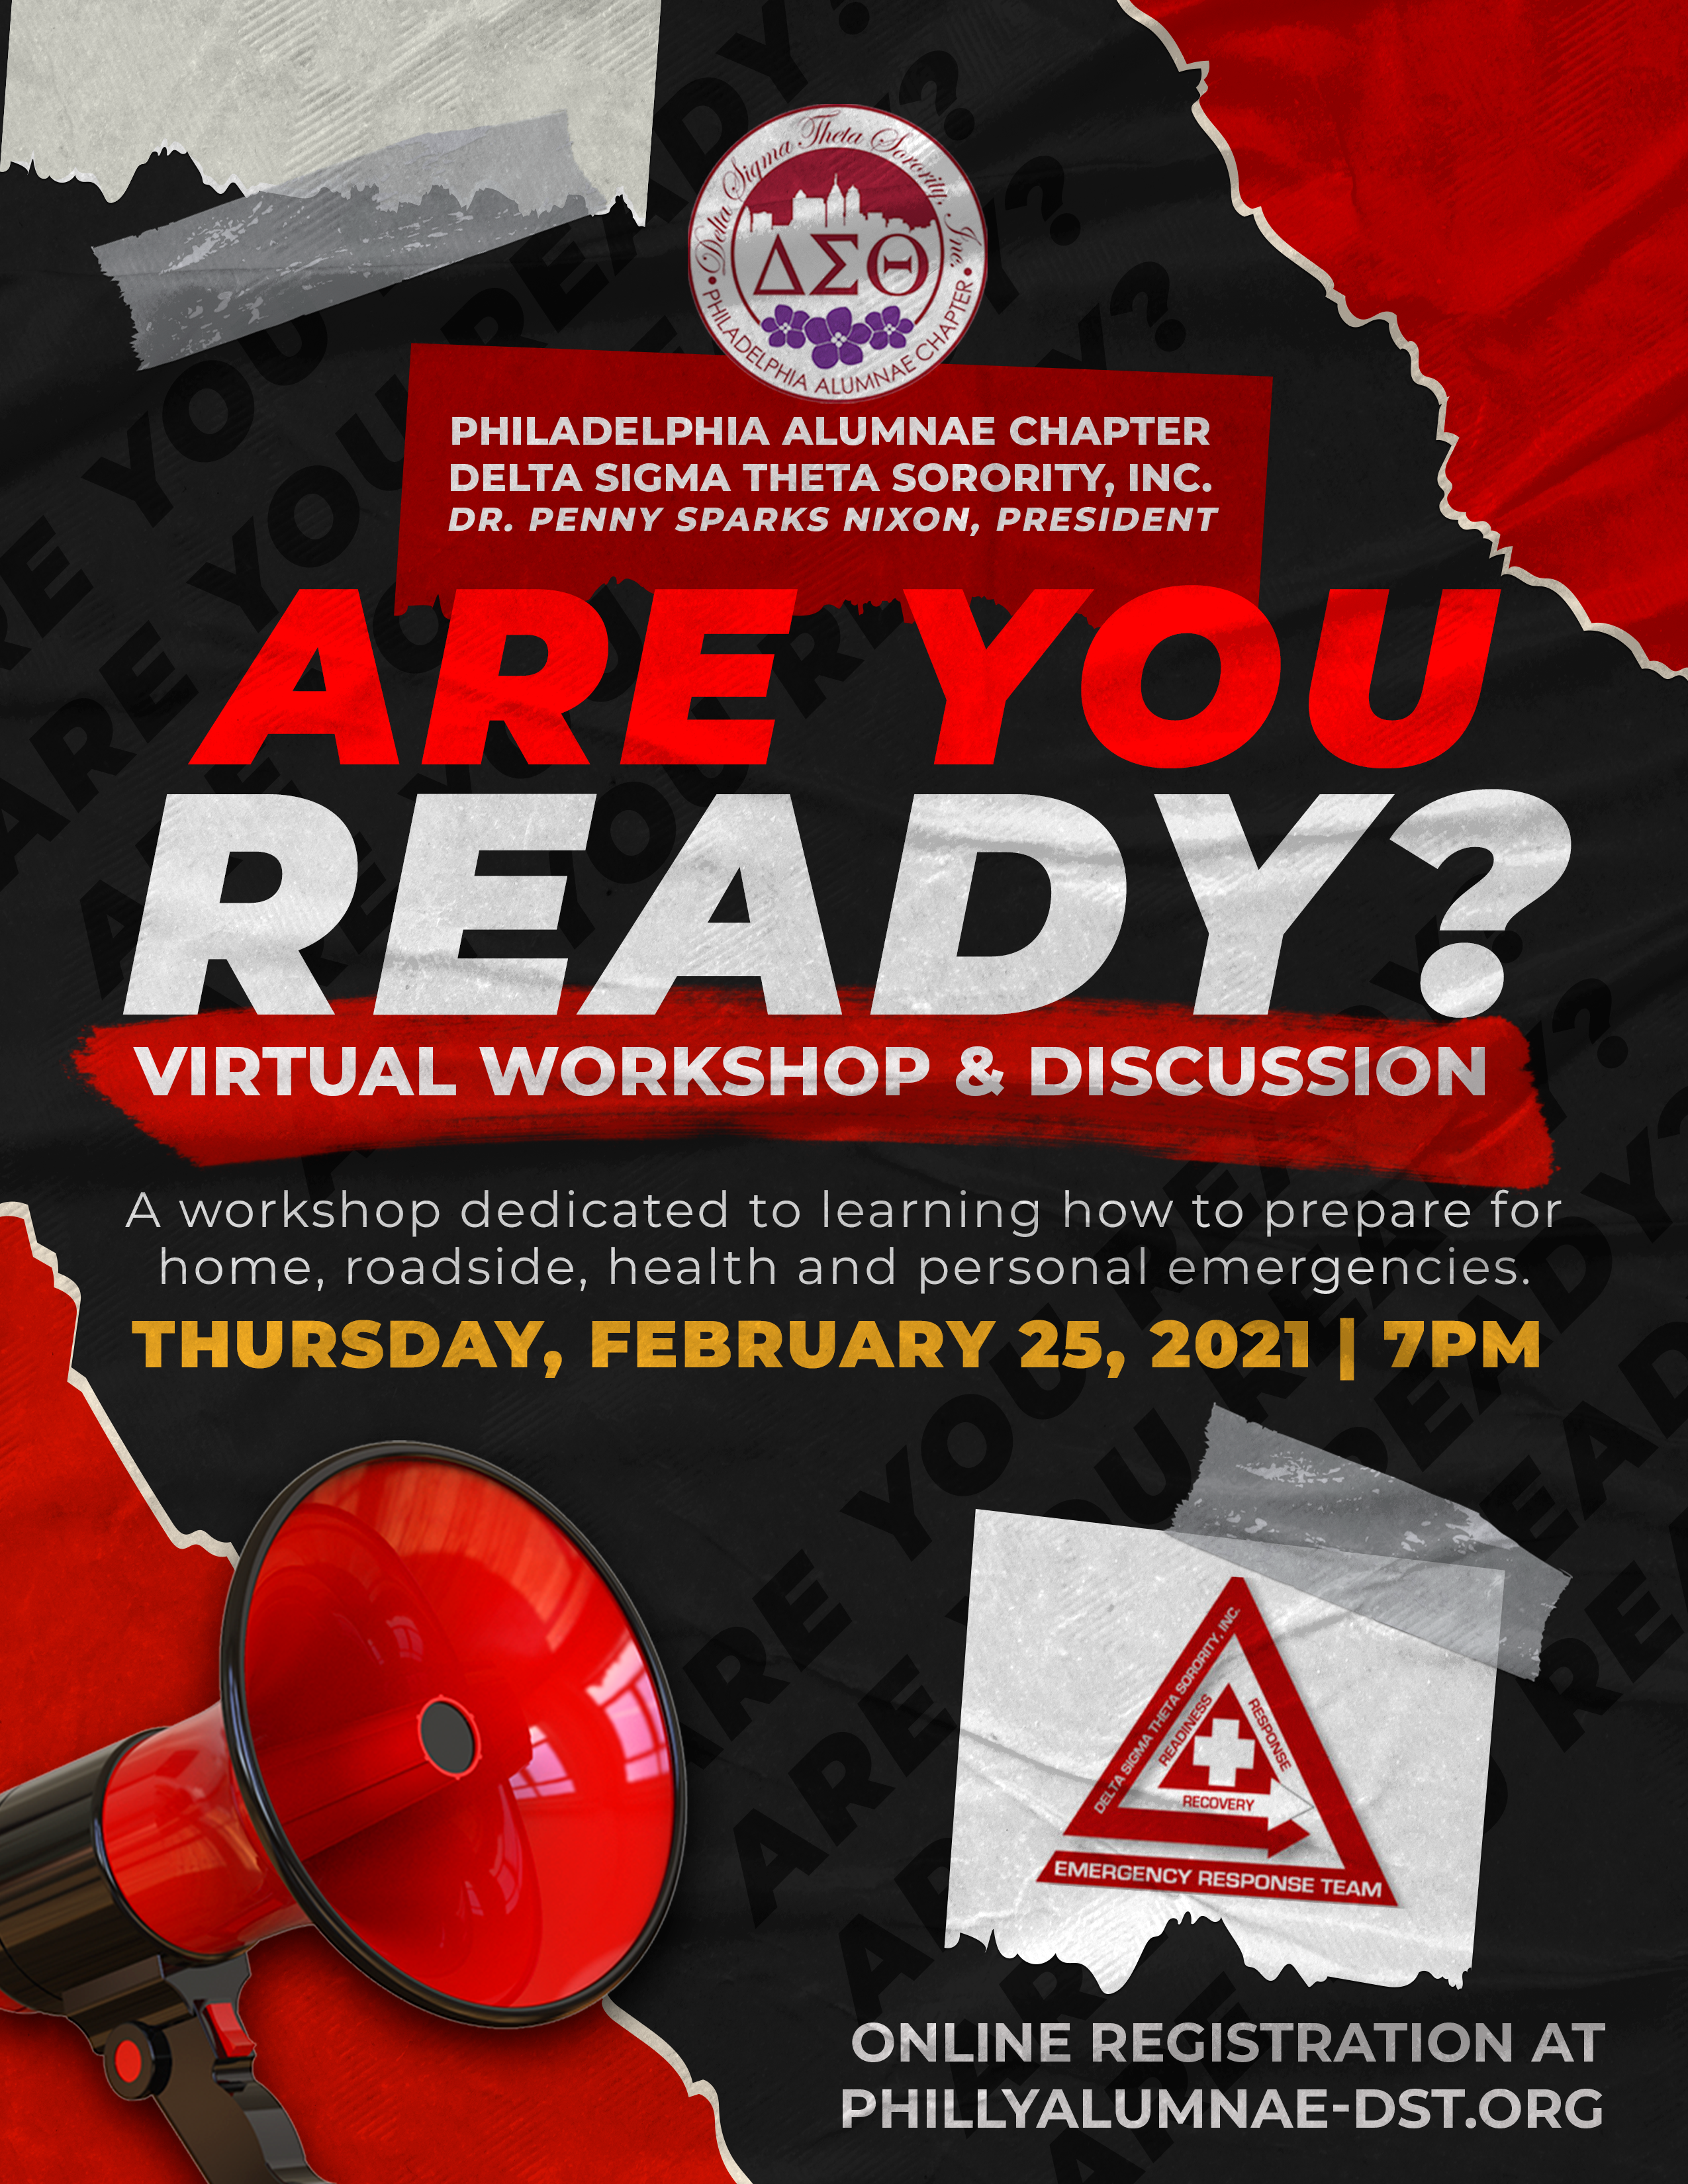 “Are You Ready?” Virtual Workshop and Discussion